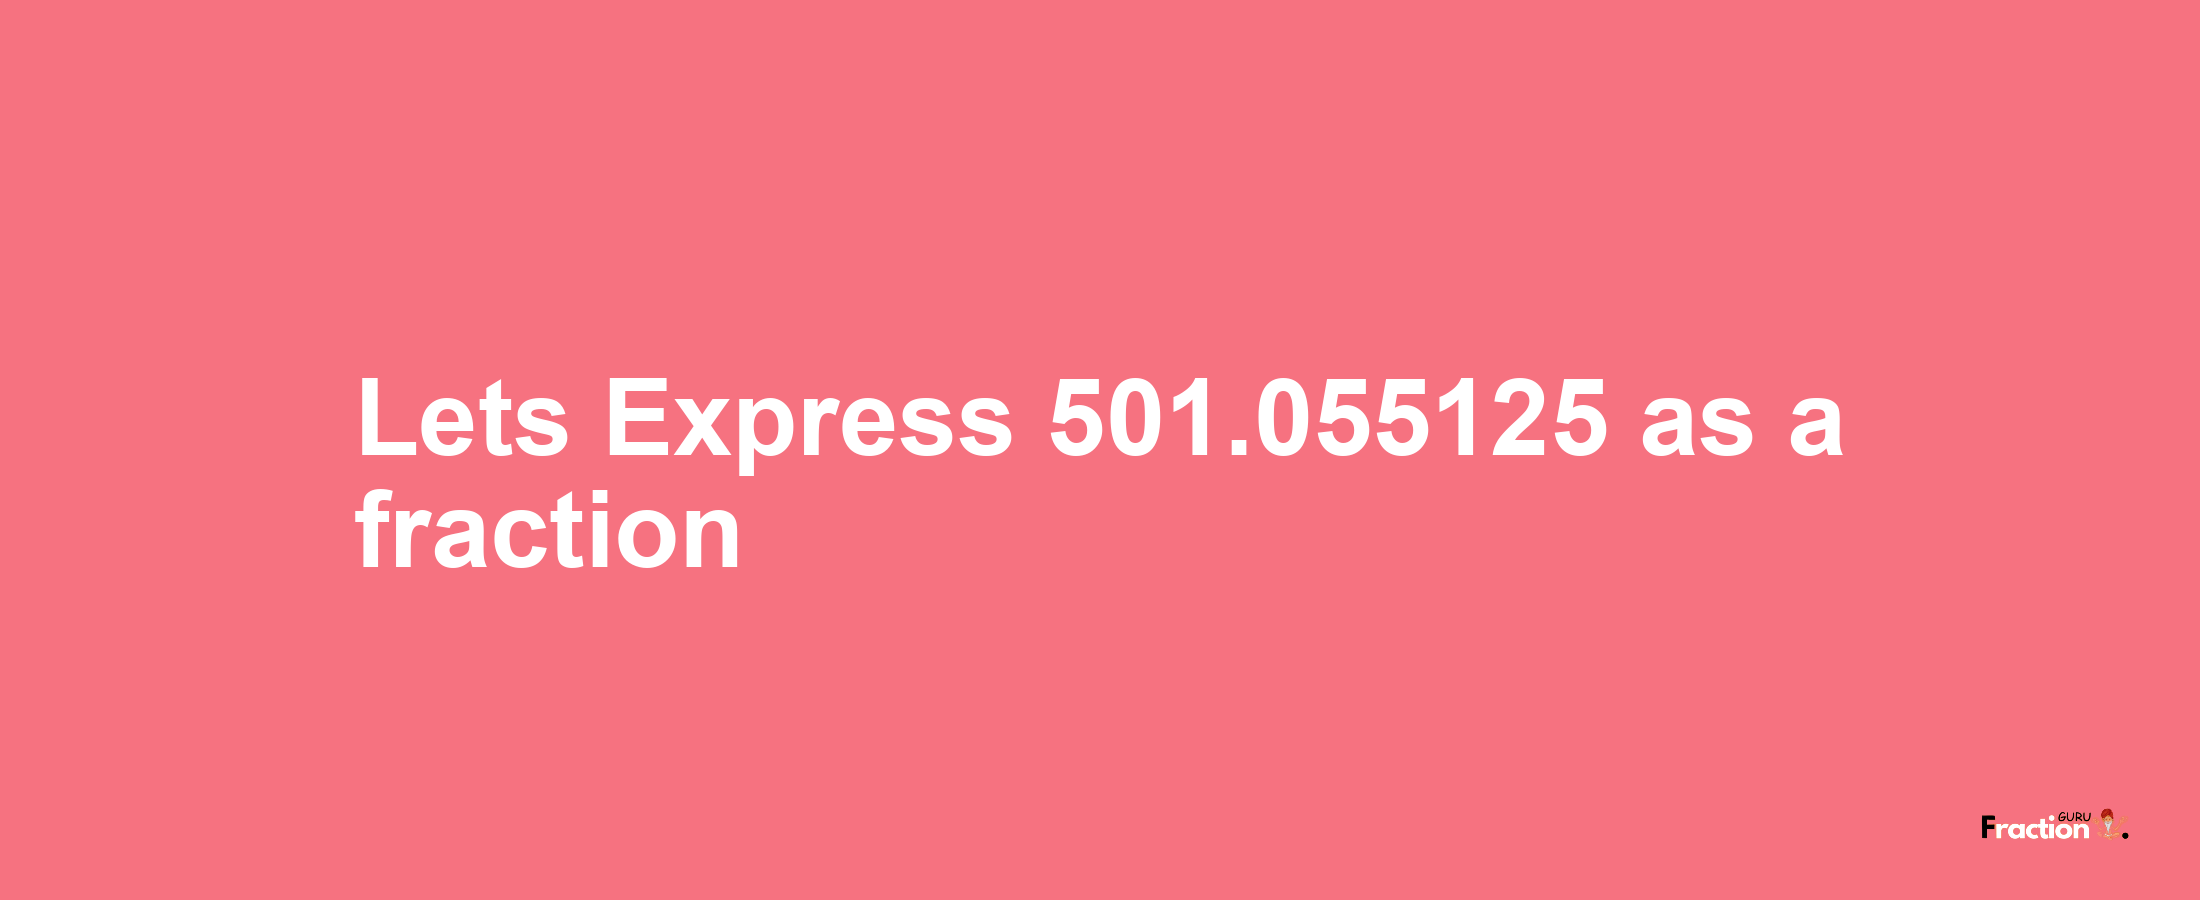 Lets Express 501.055125 as afraction